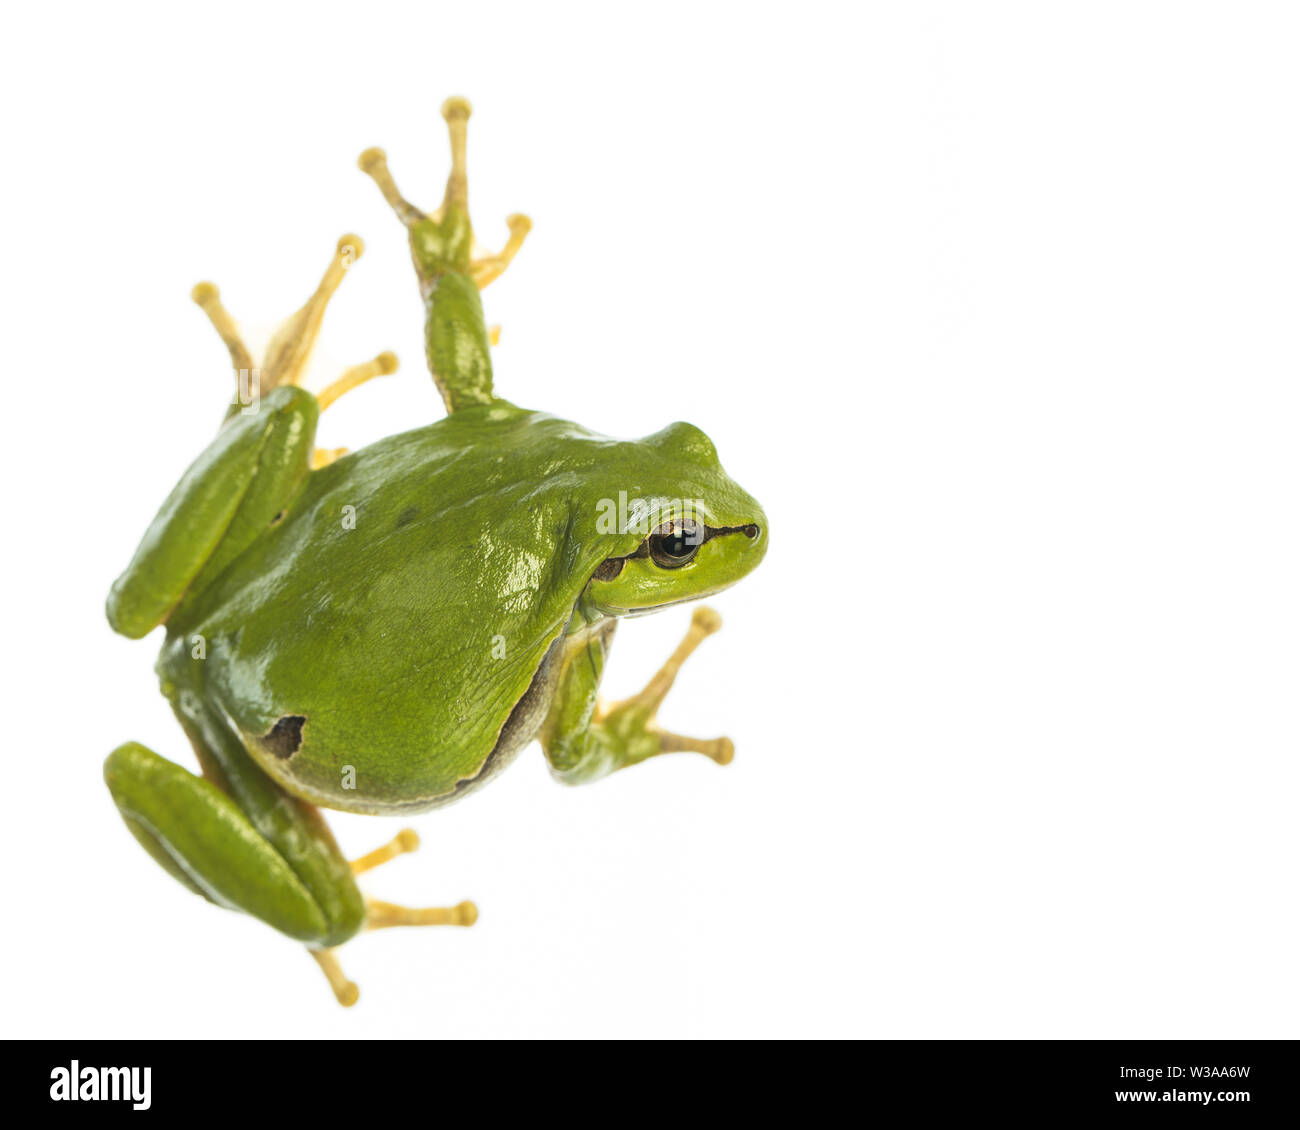 European tree frog (Hyla arborea) isolated on white background, looking to the right side Stock Photo